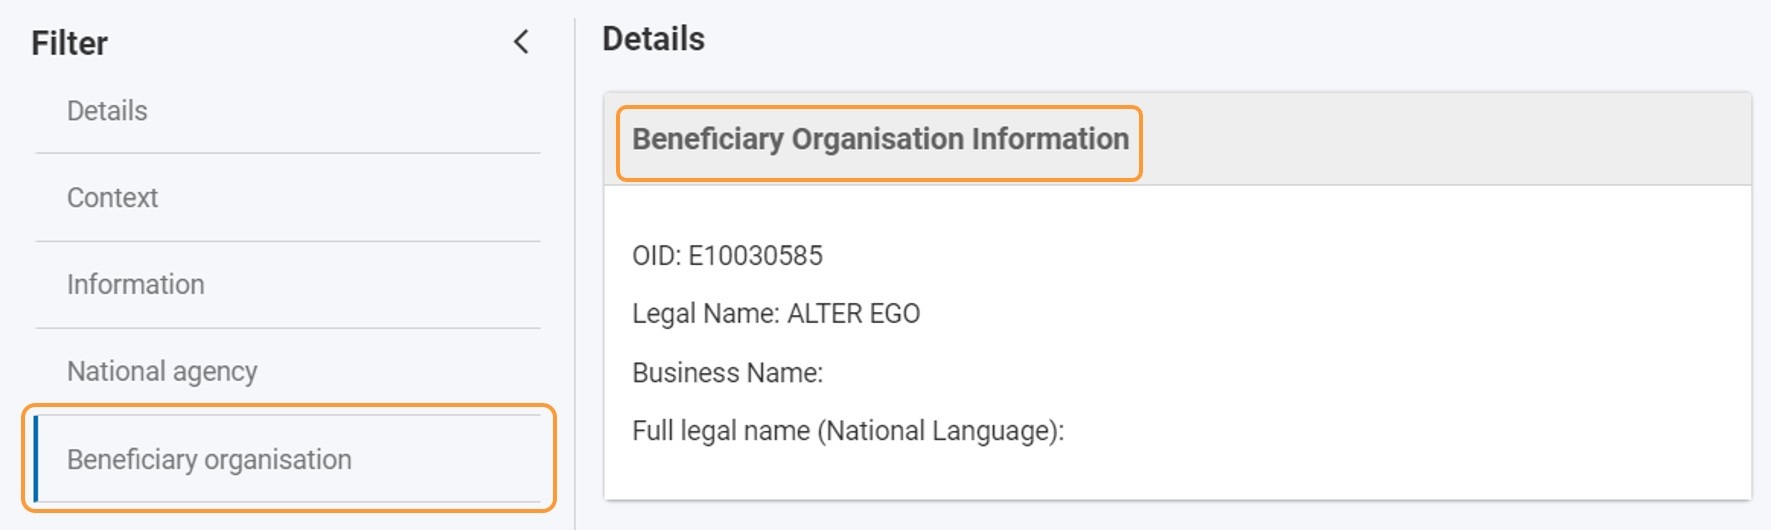 Beneficiary organisation section